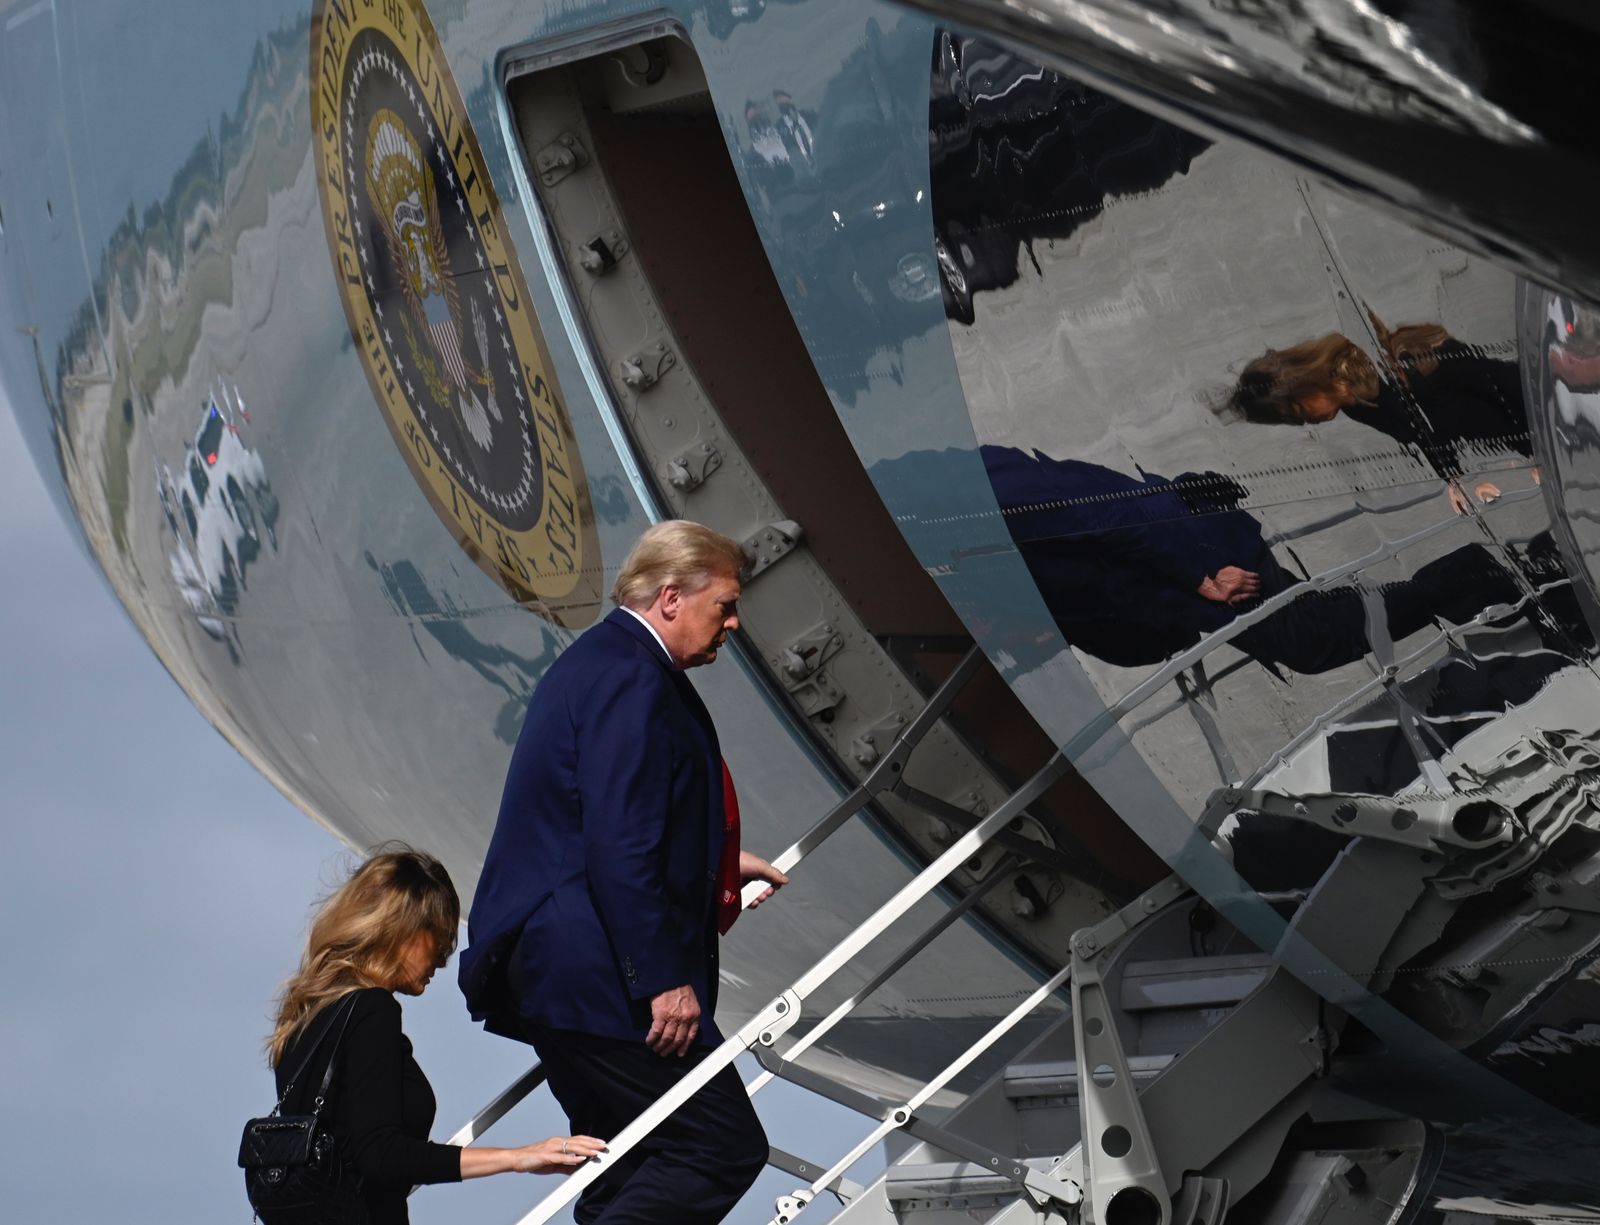 US President Donald Trump and First Lady Melania Trump board Air Force One at Palm Beach International Airport in West Palm Beach, Florida, on December 31, 2020, as they return to Washington, DC, after their Christmas holiday at Mar-a-Lago. (Photo by ANDREW CABALLERO-REYNOLDS / AFP) - AFP